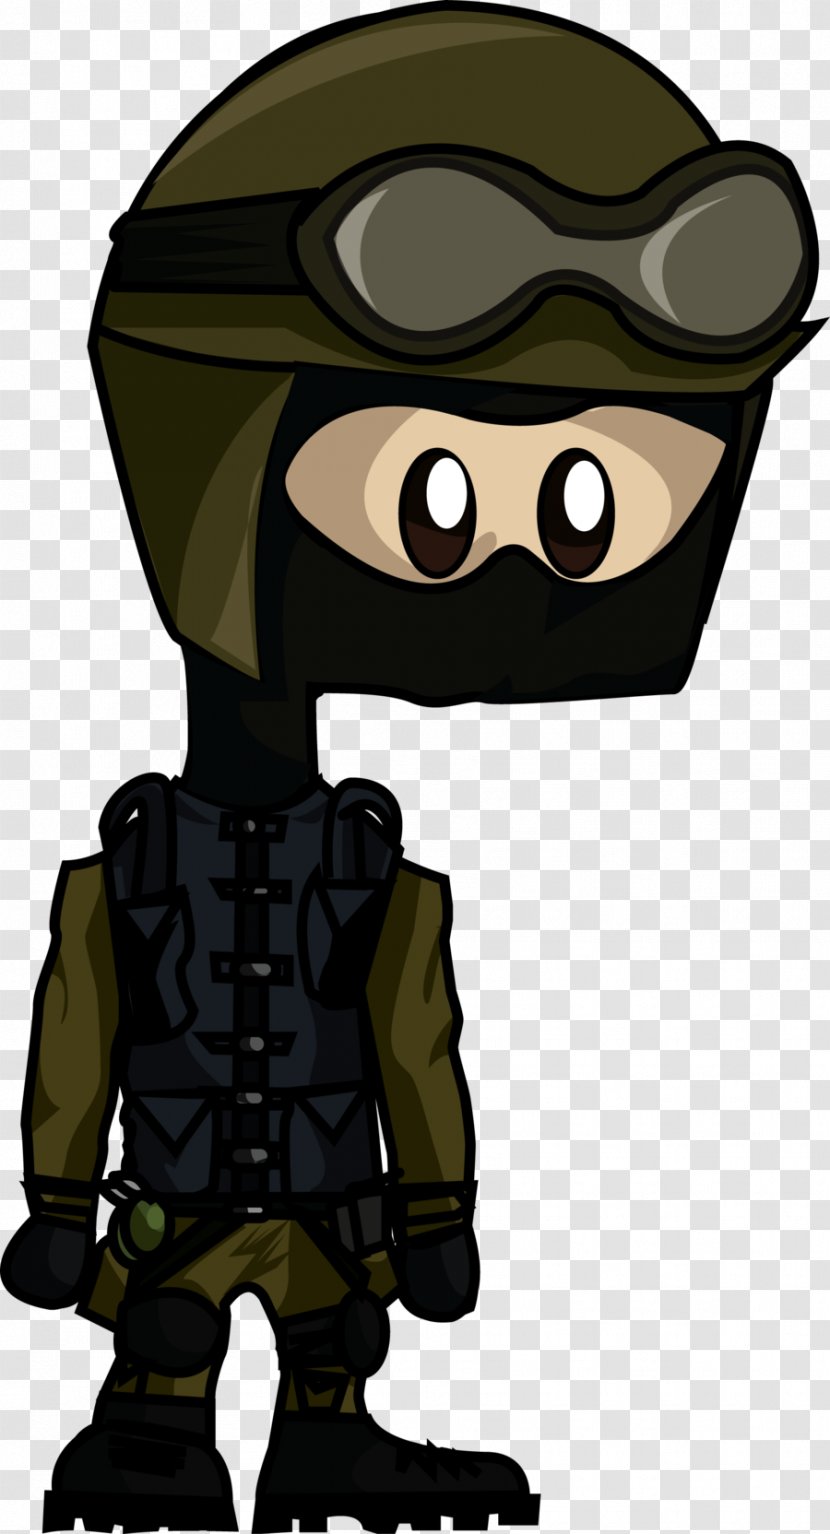 Counter-Strike: Global Offensive Cartoon Drawing - Vision Care - COUNTER Transparent PNG